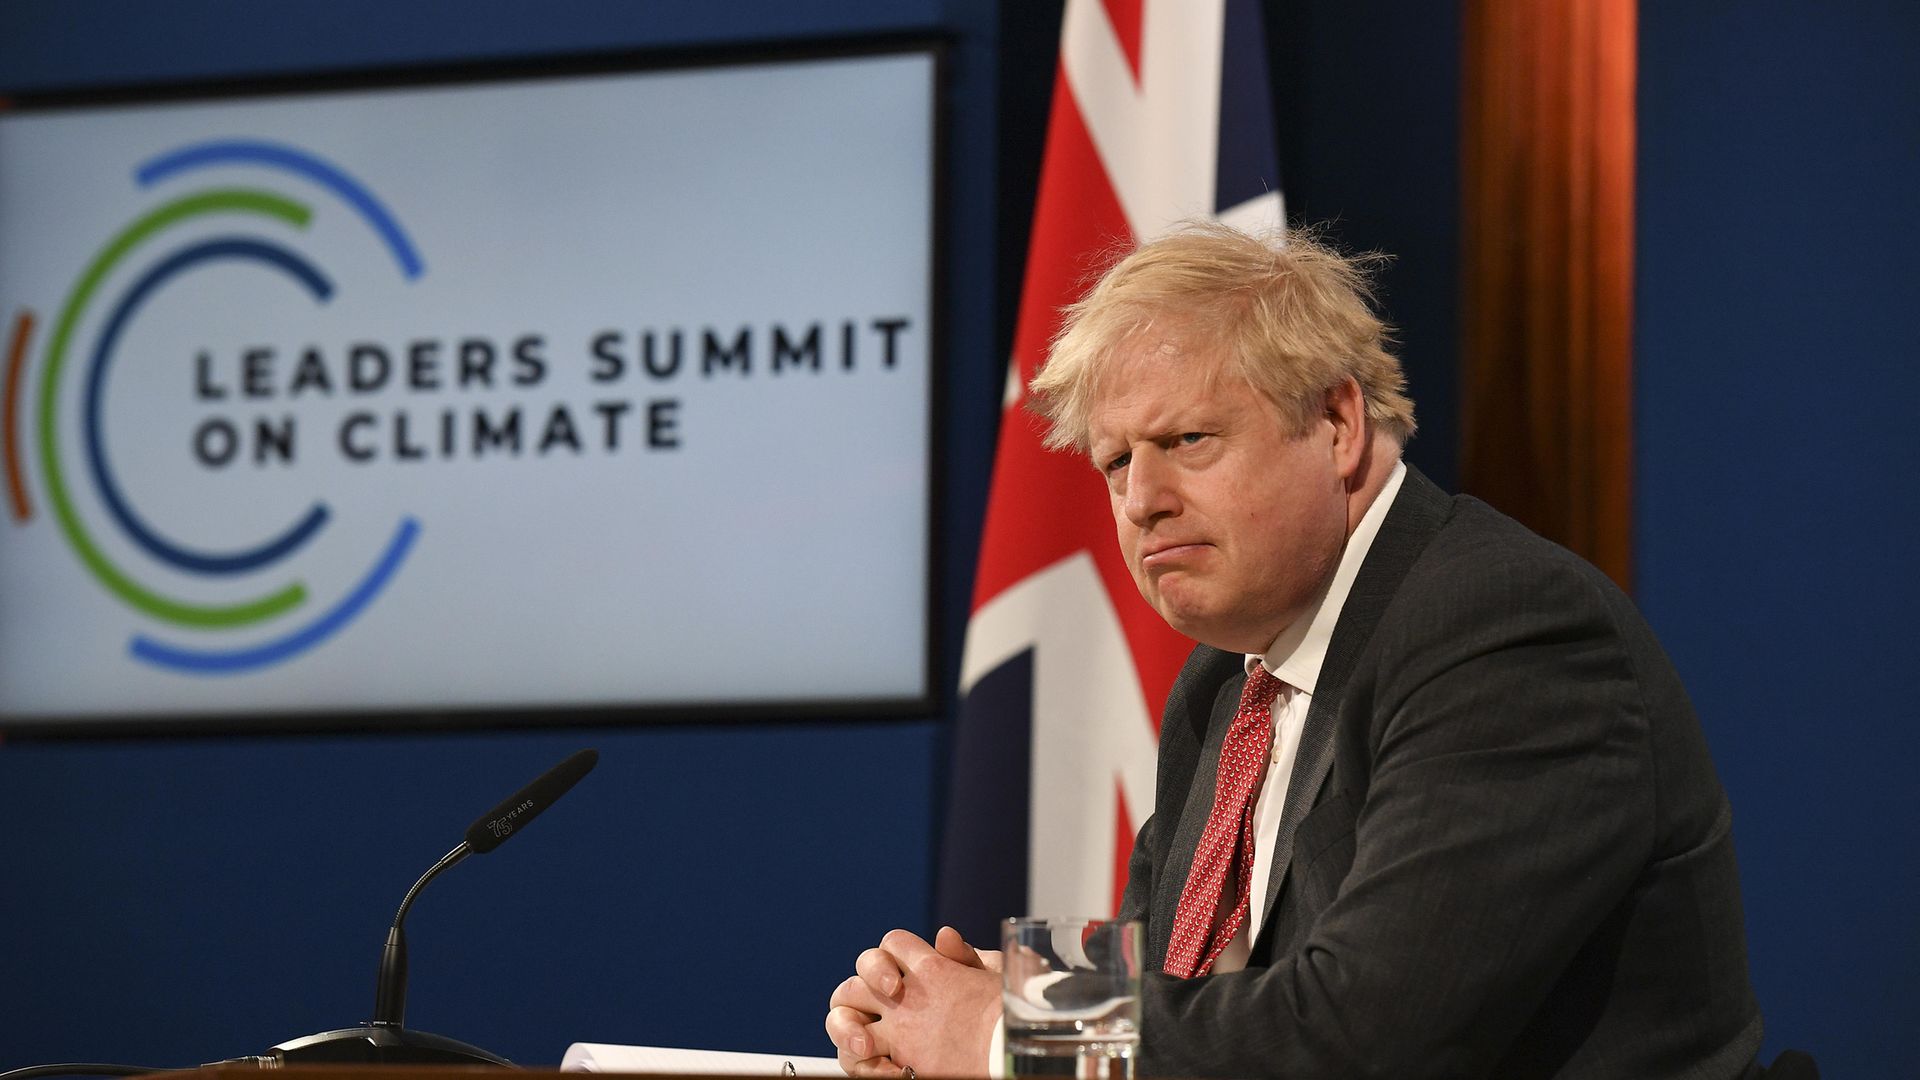 Prime Minister Boris Johnson speaks during the opening session of the virtual global Leaders Summit on Climate from the Downing Street Briefing Room in central London. Picture date: Thursday April 22, 2021. - Credit: PA